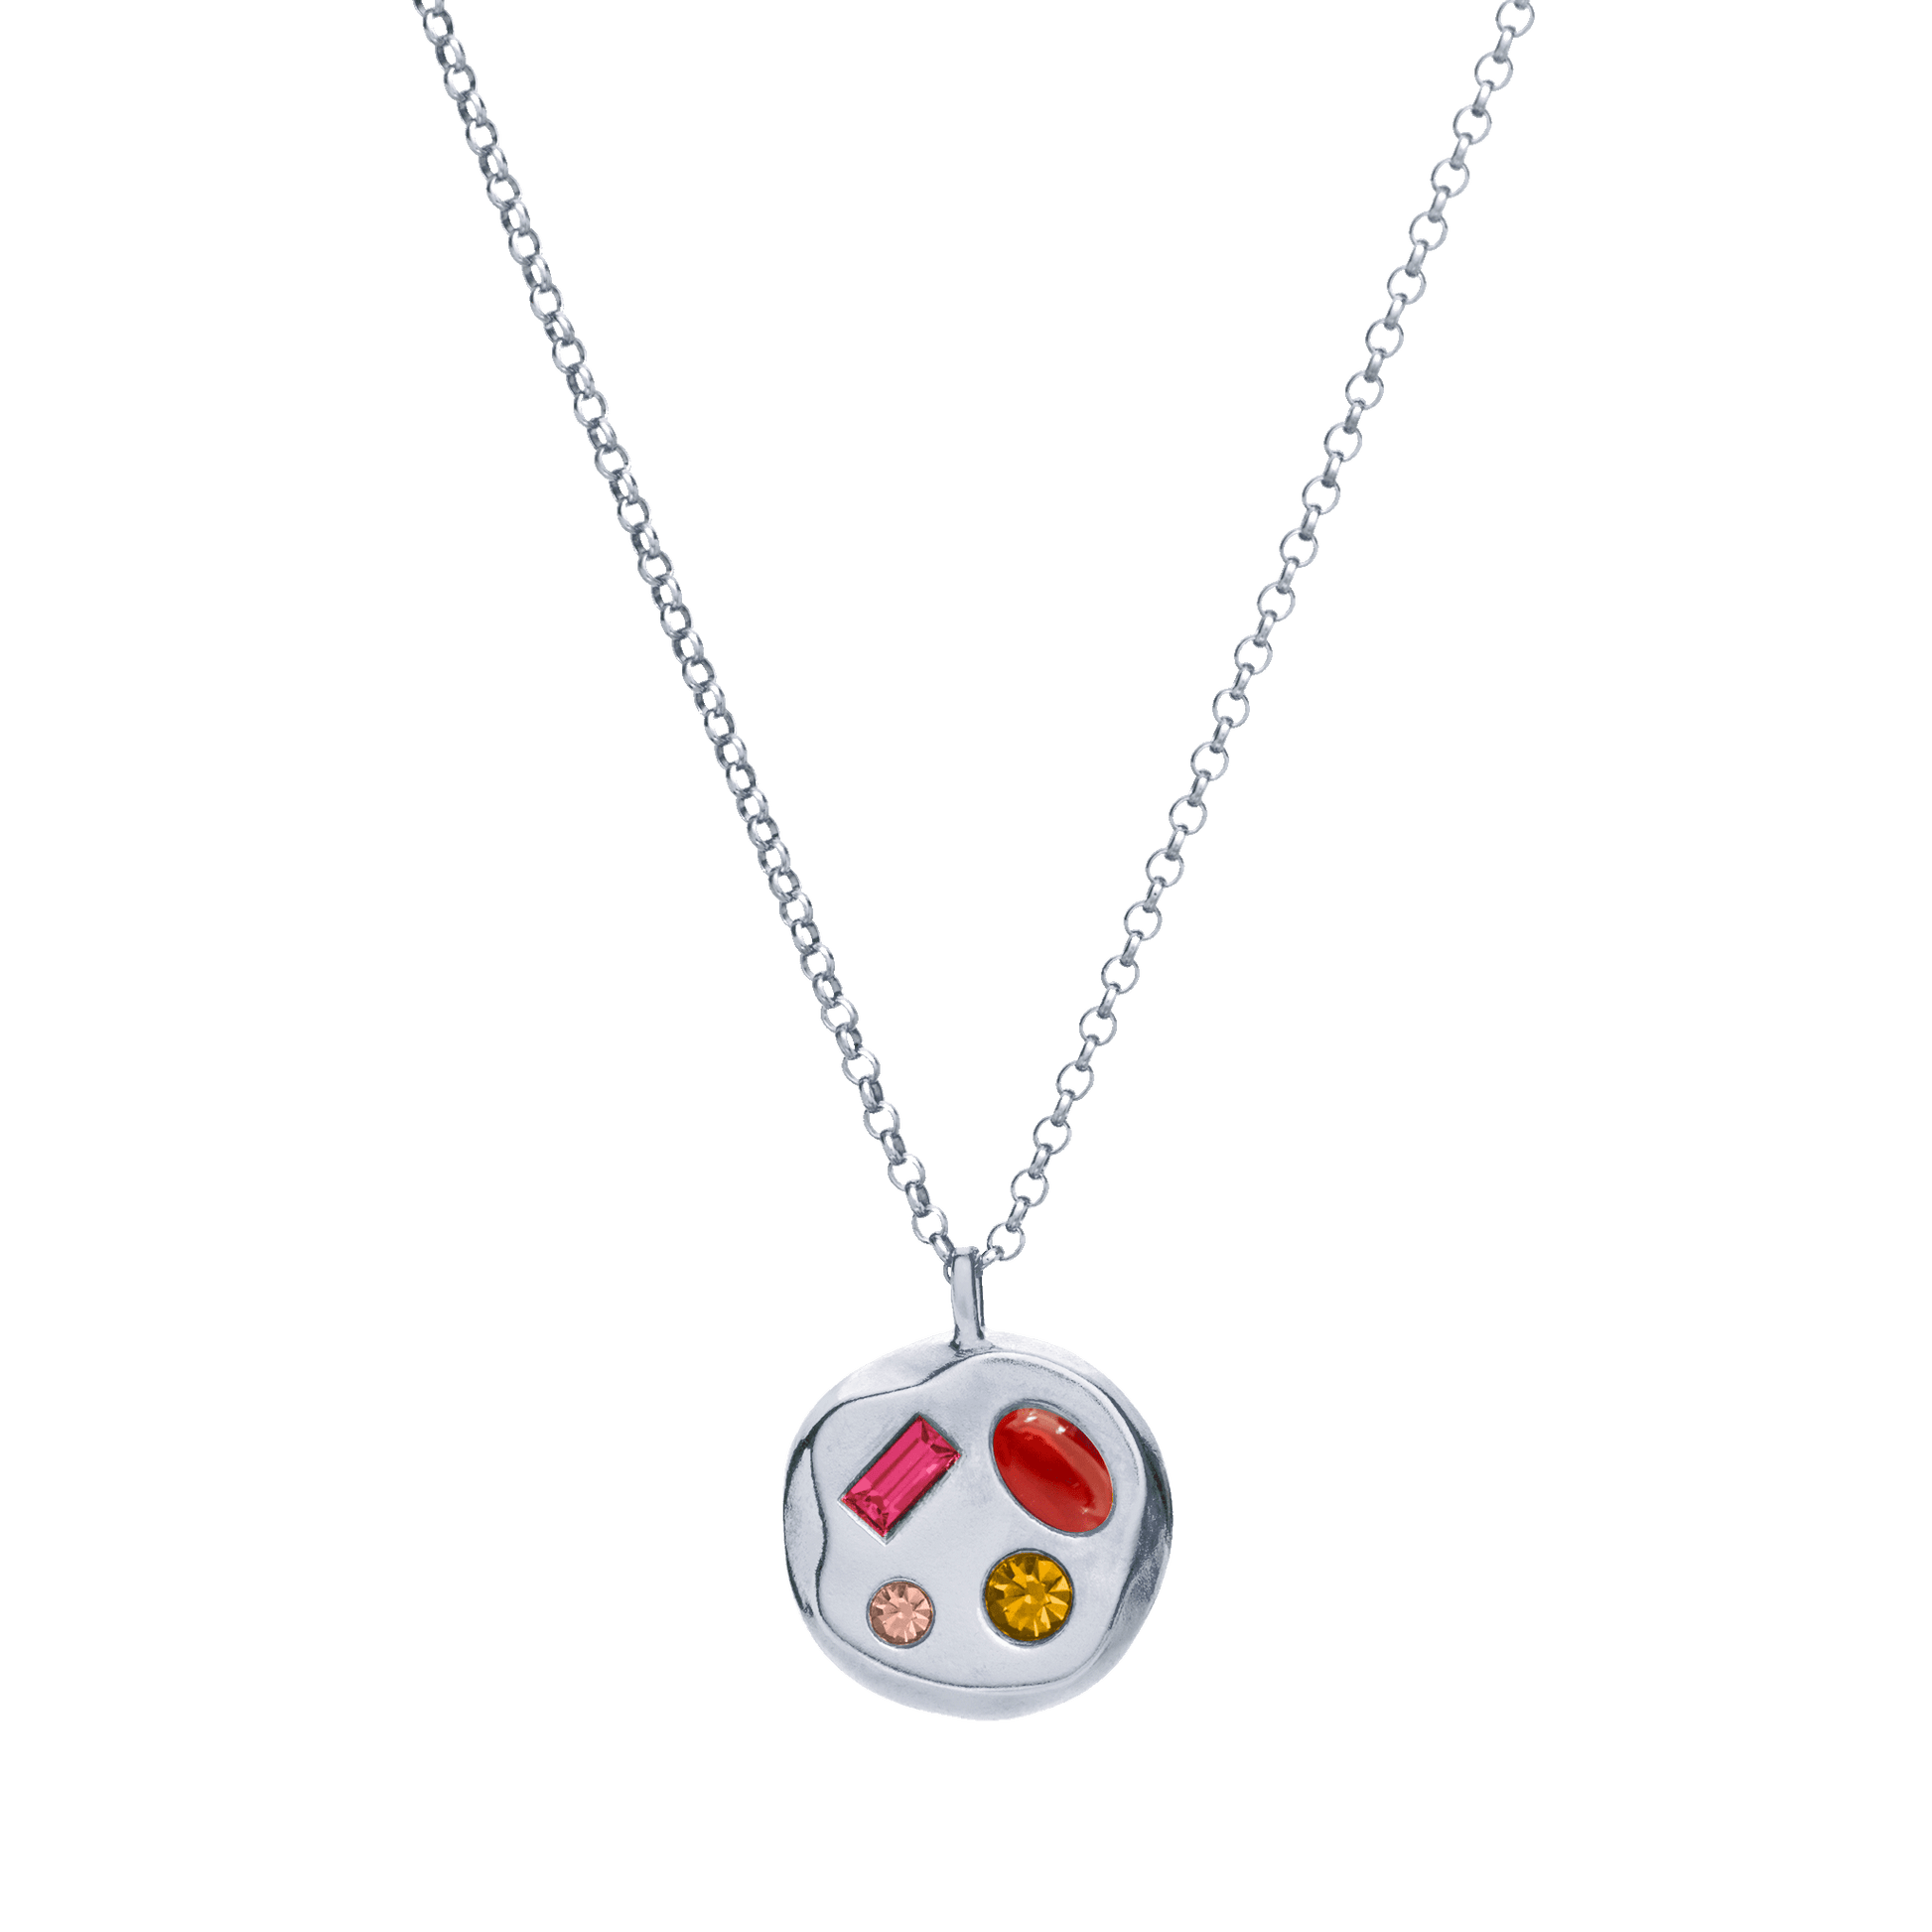 The July Sixteenth Pendant in Sterling Silver